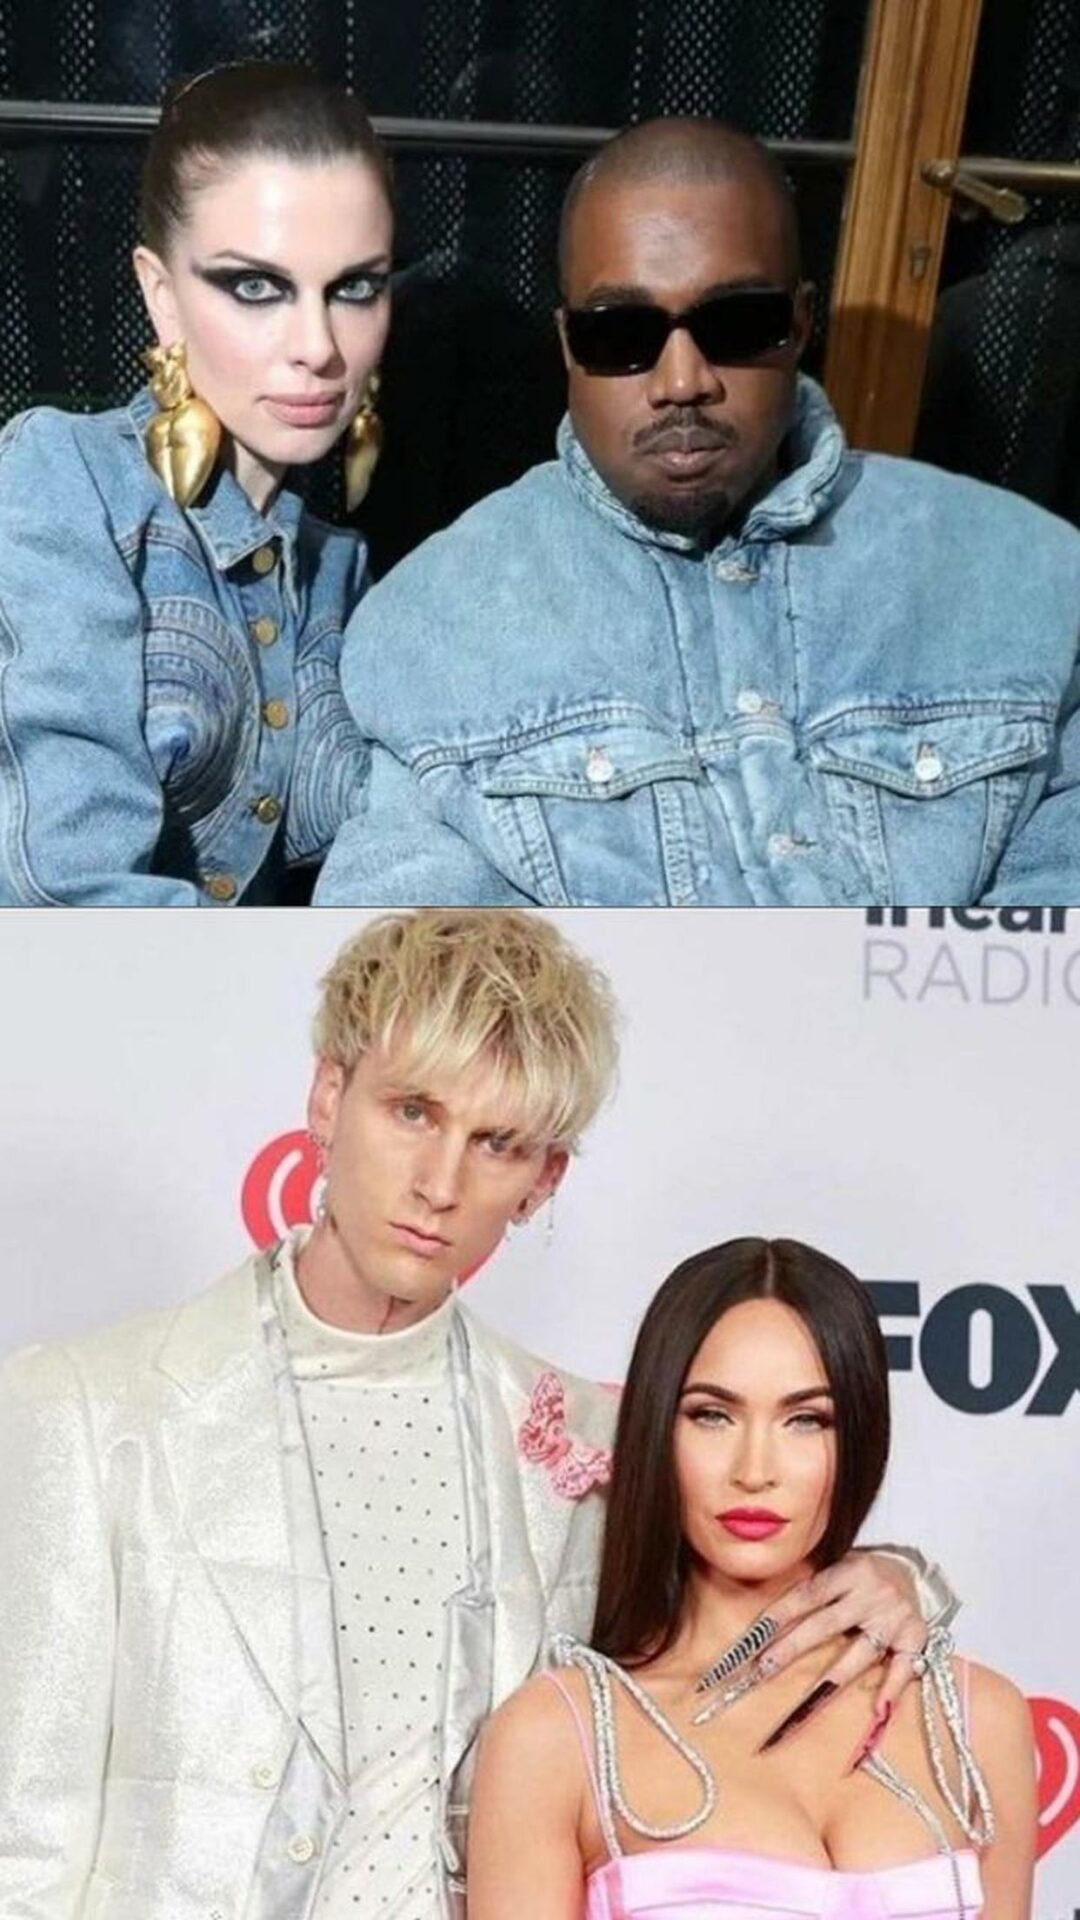 Megan Fox & Mgk To Kanye & Julia Fox, Couples That Wore Matching Outfits On The Red Carpet